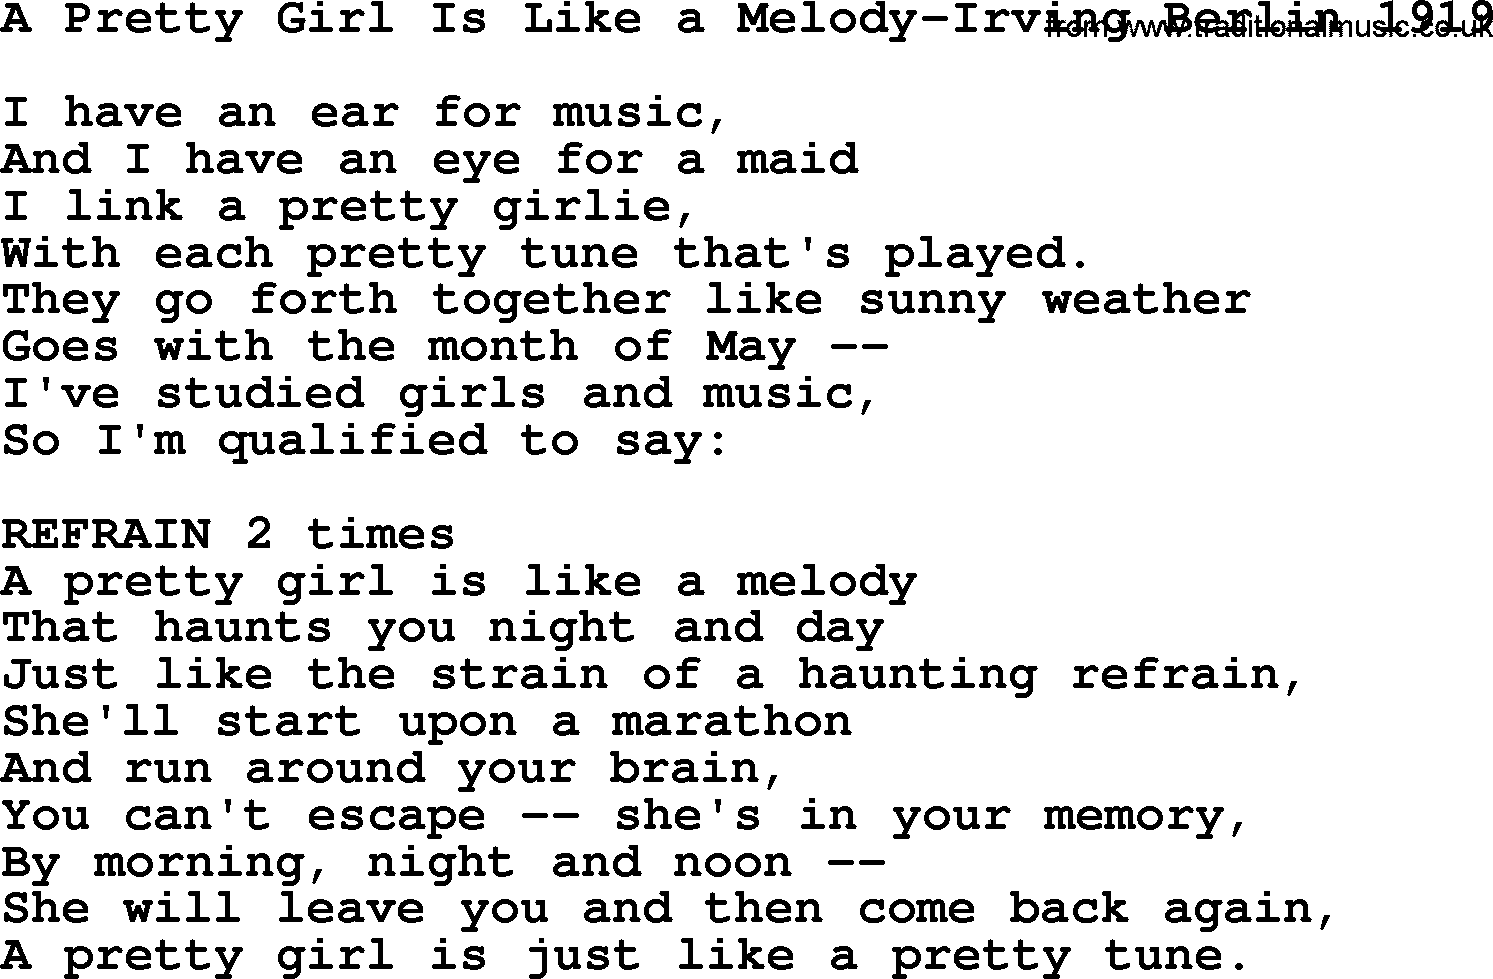 World War(WW1) One Song: A Pretty Girl Is Like A Melody-Irving Berlin 1919, lyrics and PDF